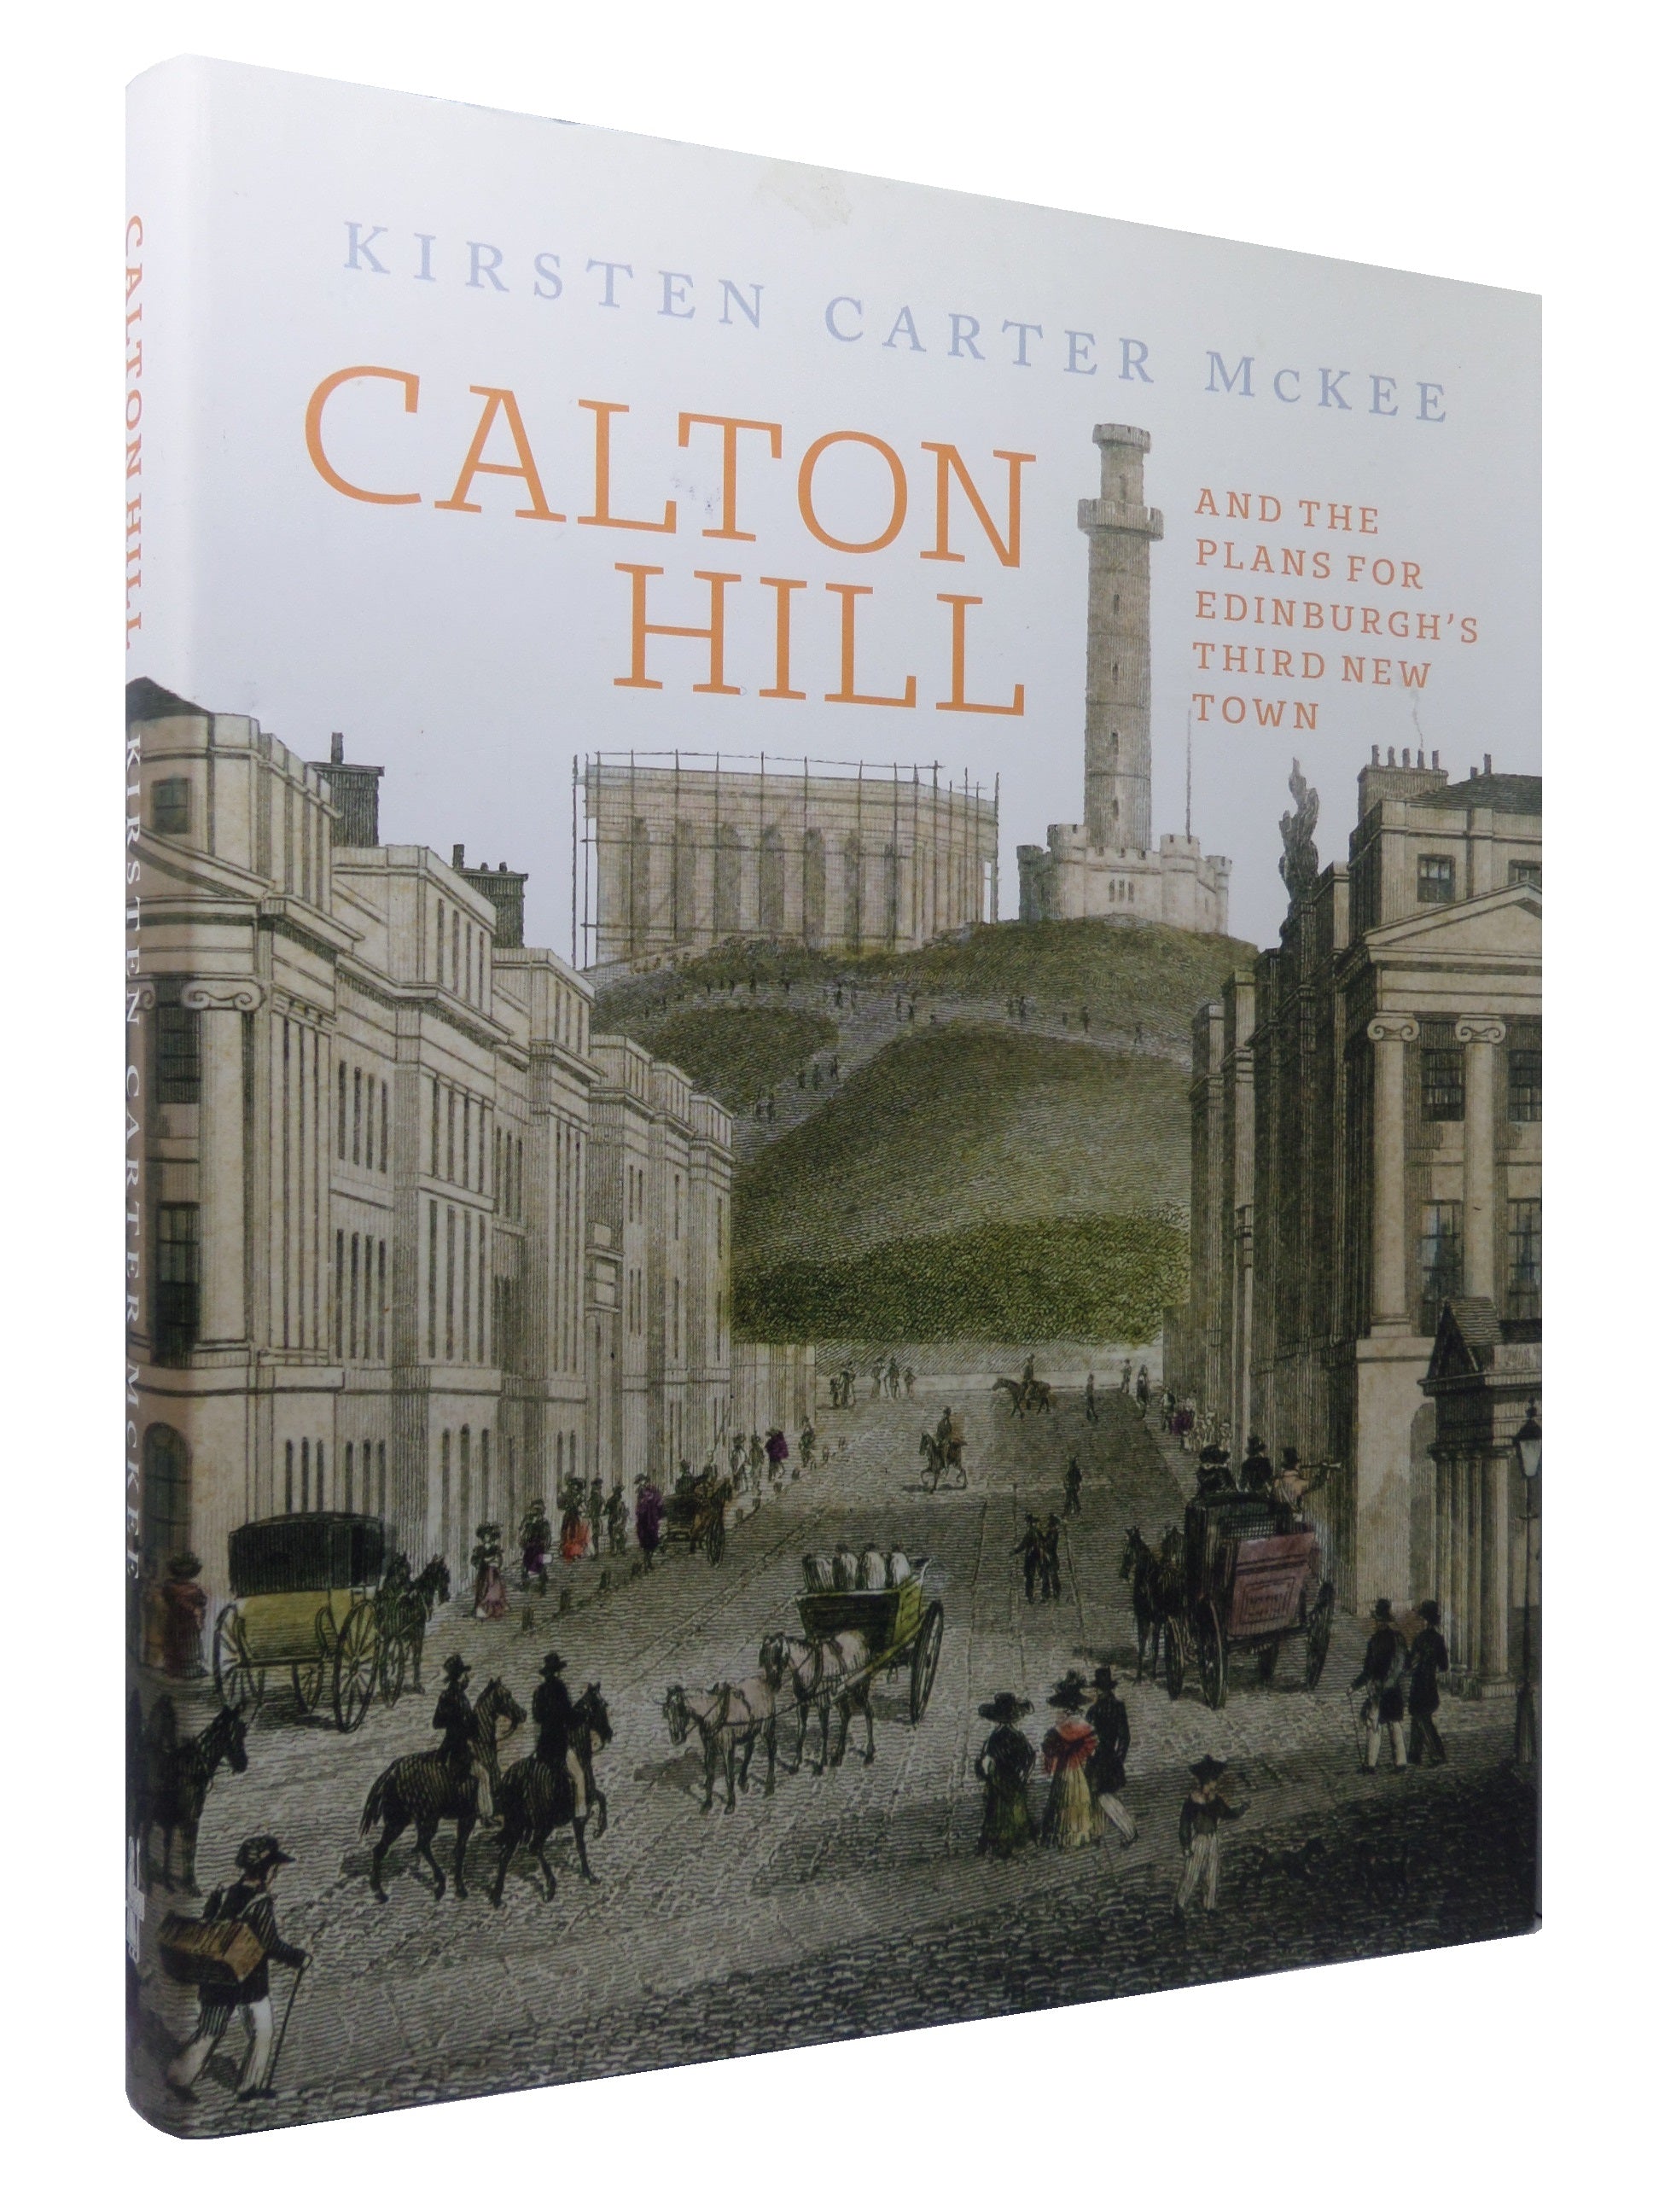 CALTON HILL BY KIRSTEN CARTER MCKEE 2018 FIRST EDITION HARDCOVER